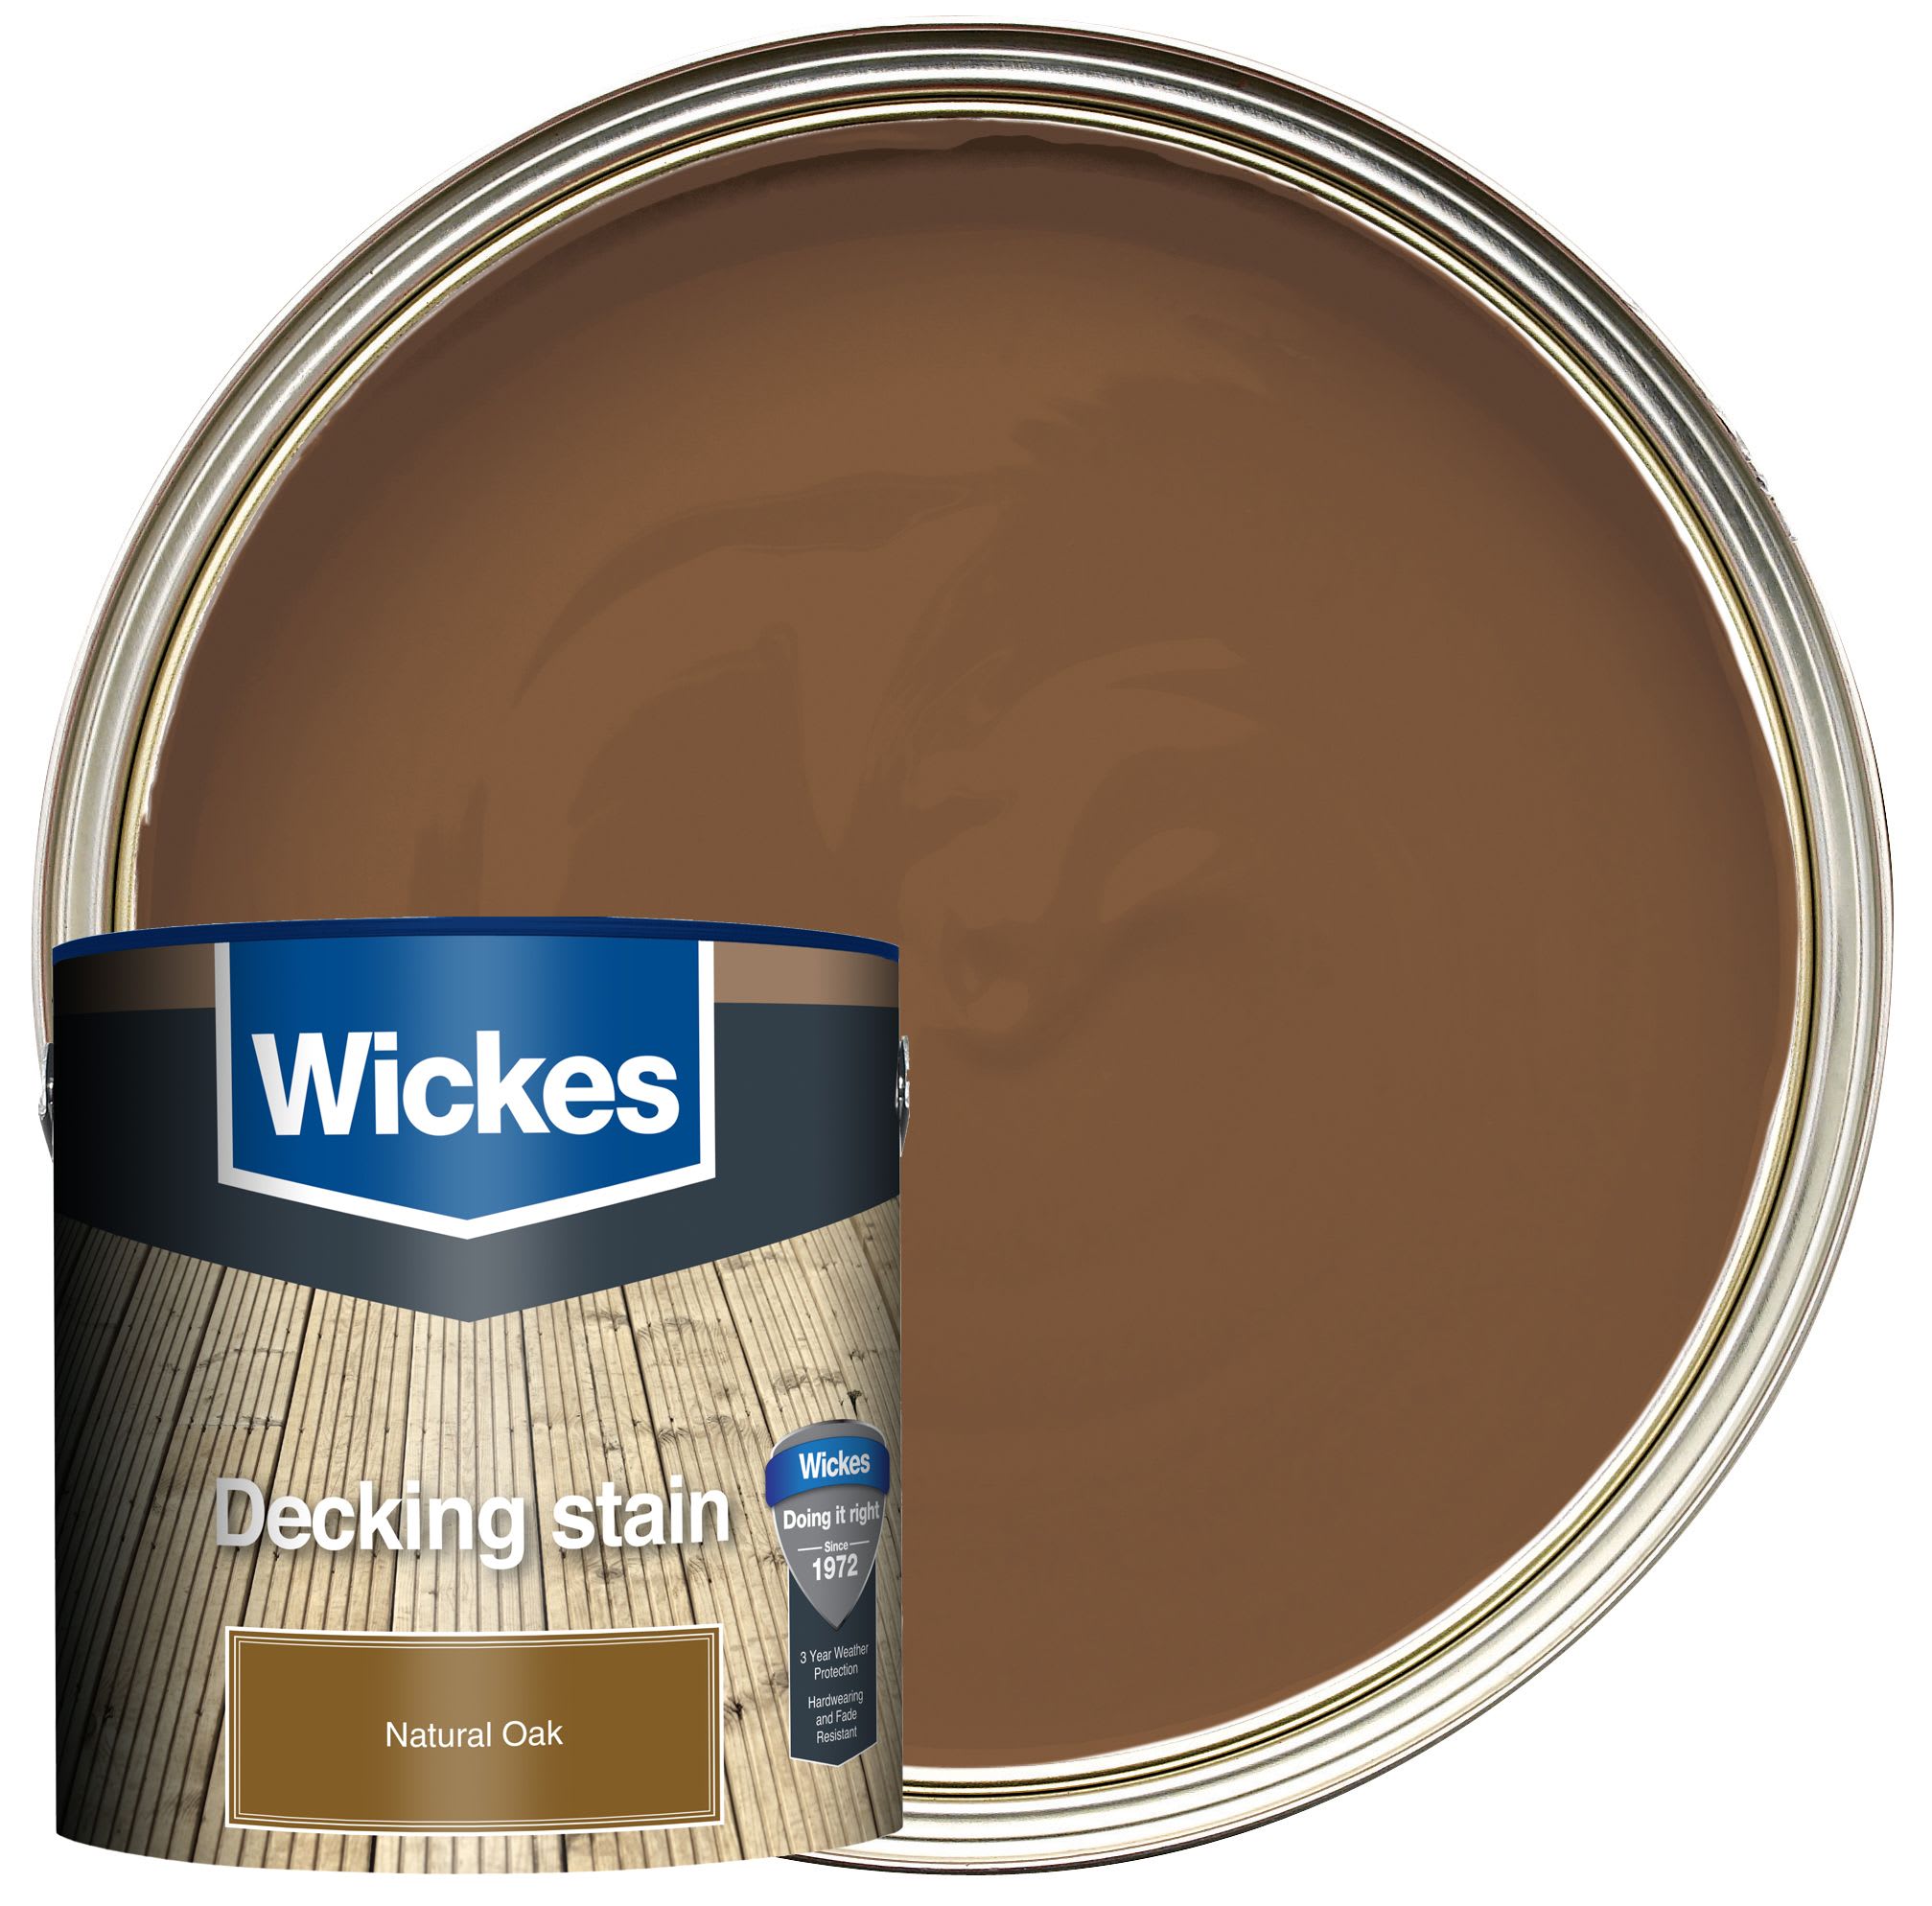 Wickes Decking Stain - Natural Oak 2.5L